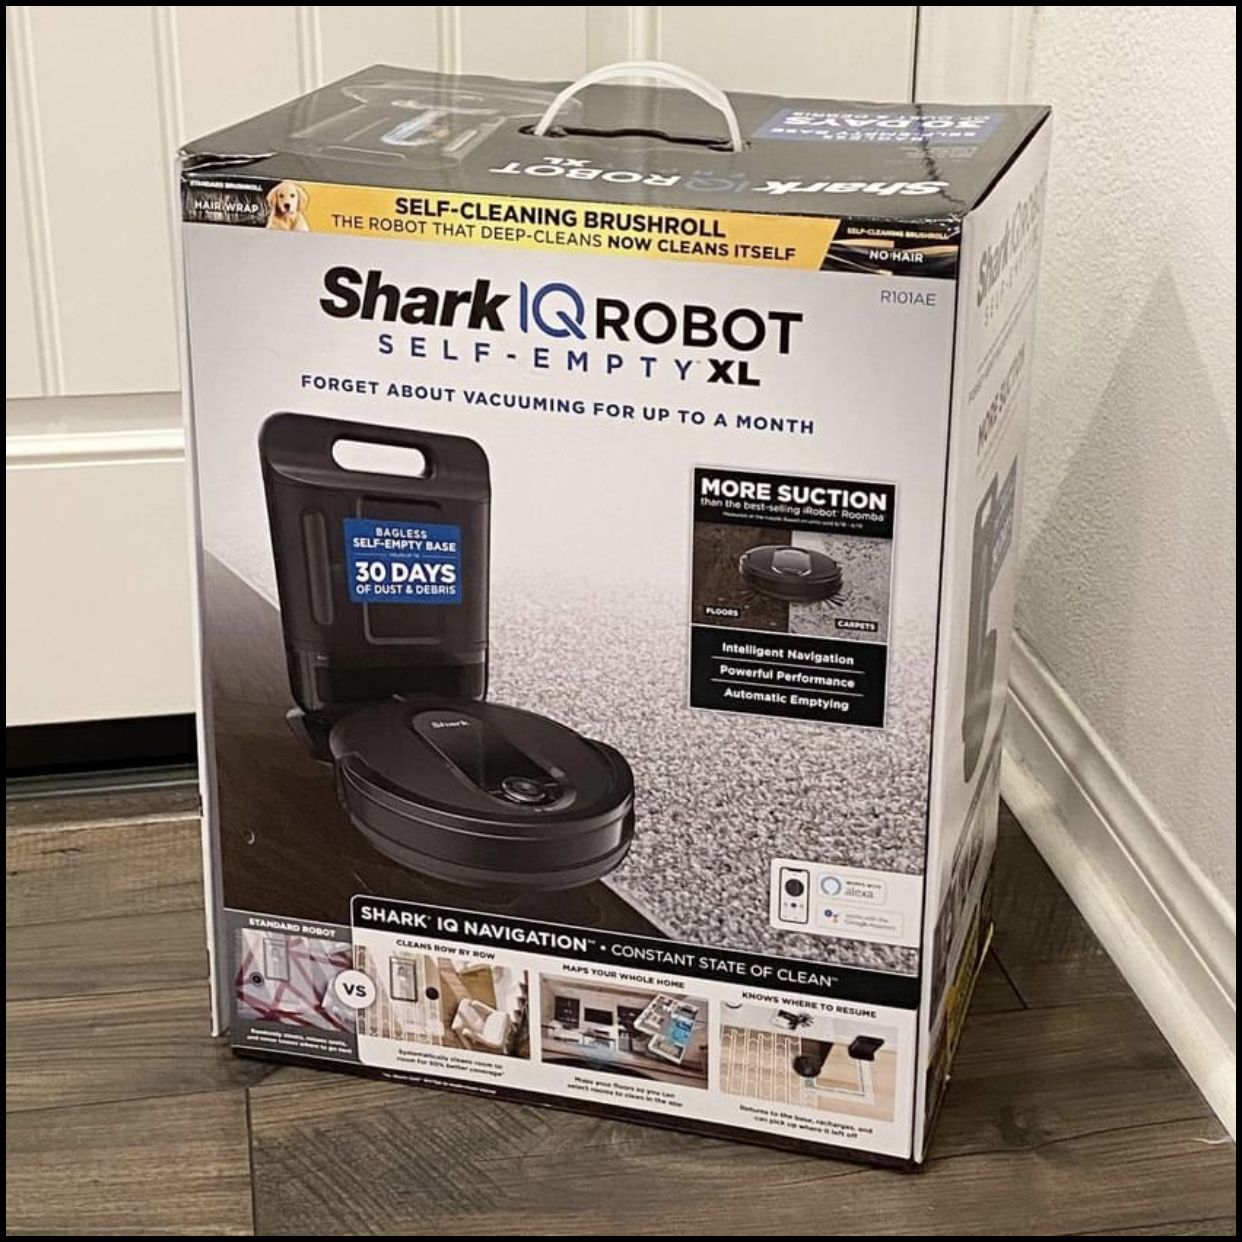 NEW Shark IQ Robot w XL Self Emptying Base. Smart Vacuum, Wifi, App, Home Mapping R101AE R1001AE roomba i7+